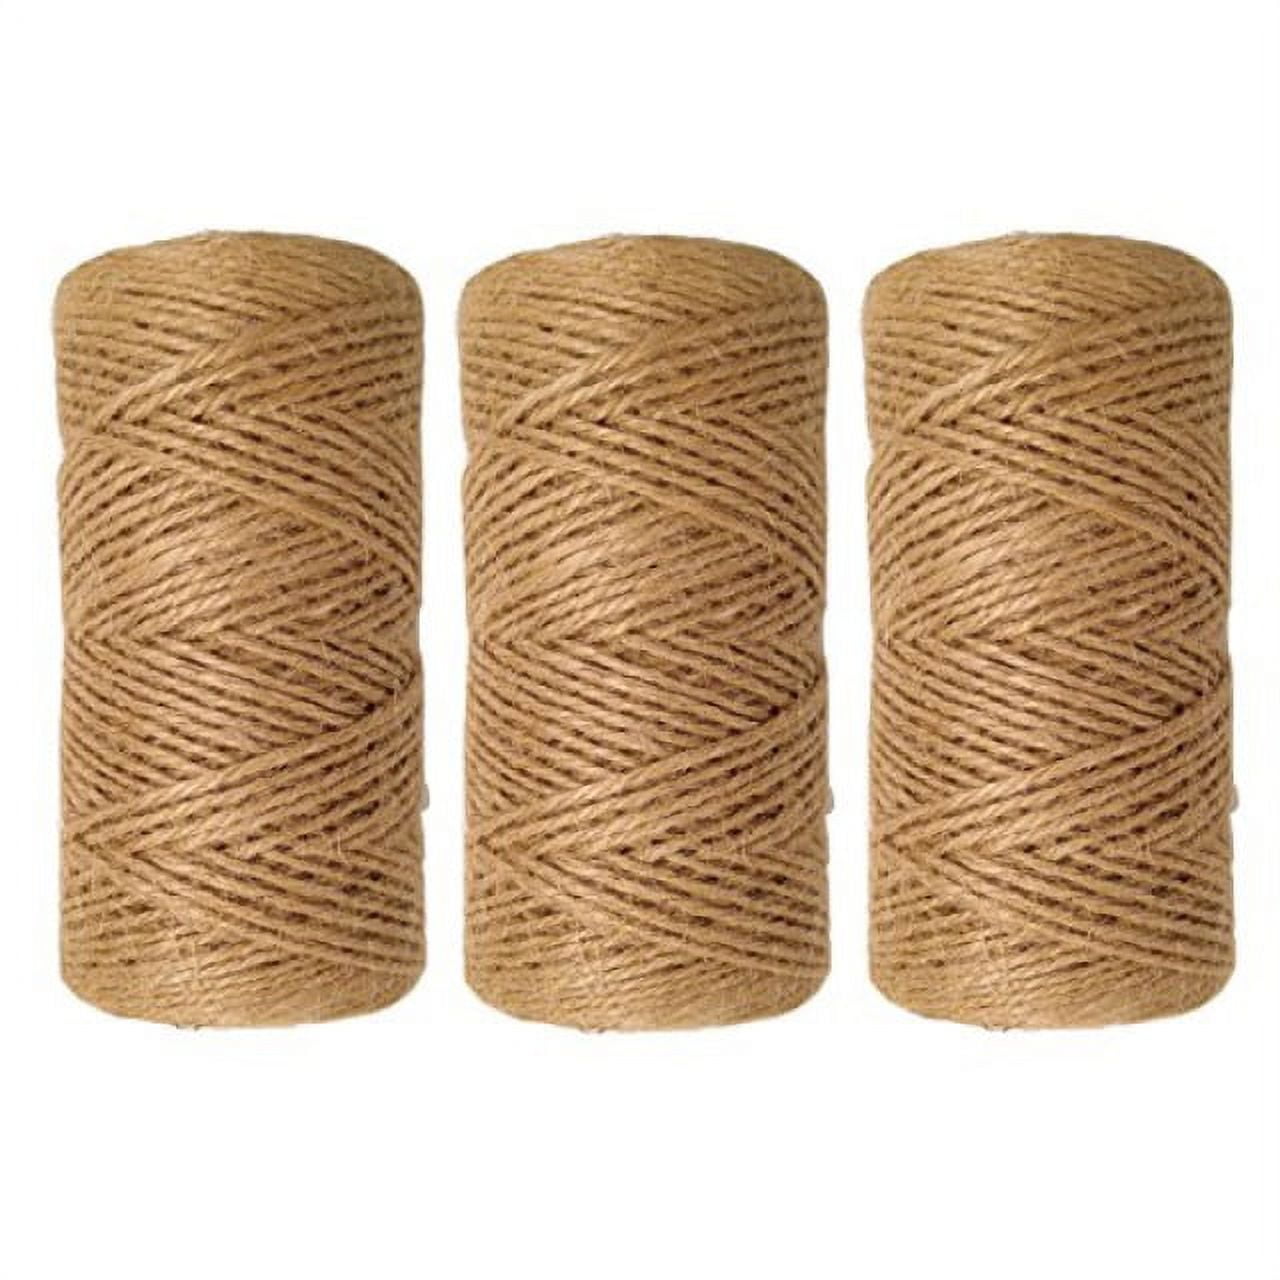 24 Rolls Colored Twine String for Crafts, 2mm Macrame Cord for Gift  Wrapping, 12 Colors (11 Yards Each, 264 Yards Total)